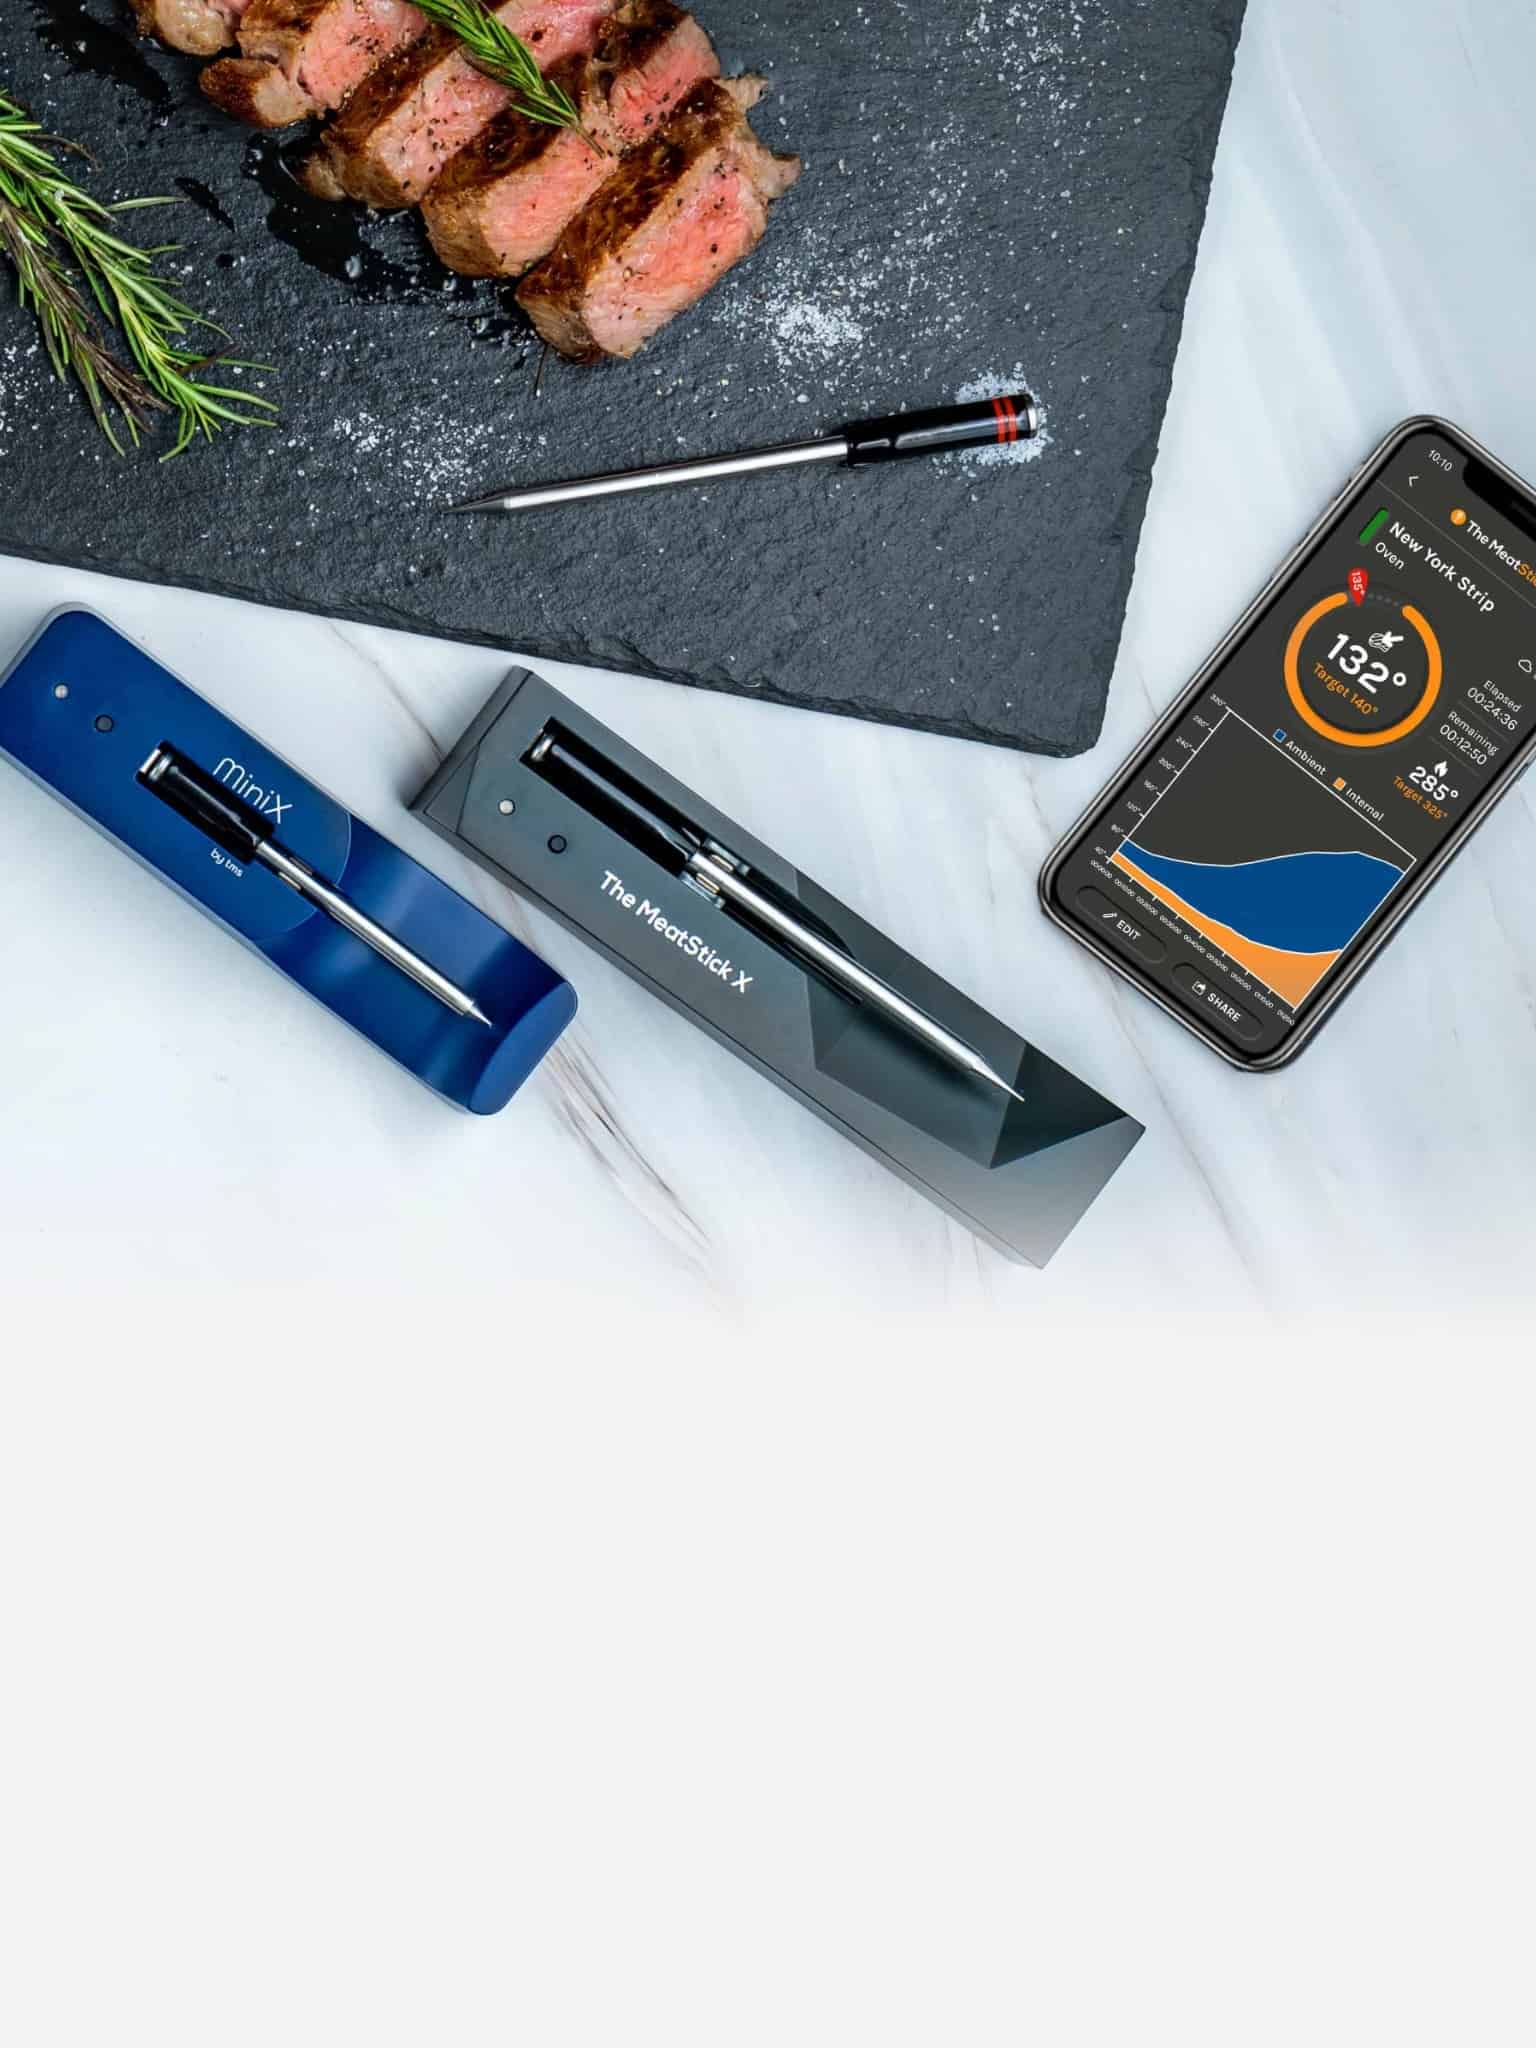 The MeatStick Smart Wireless Meat Thermometer